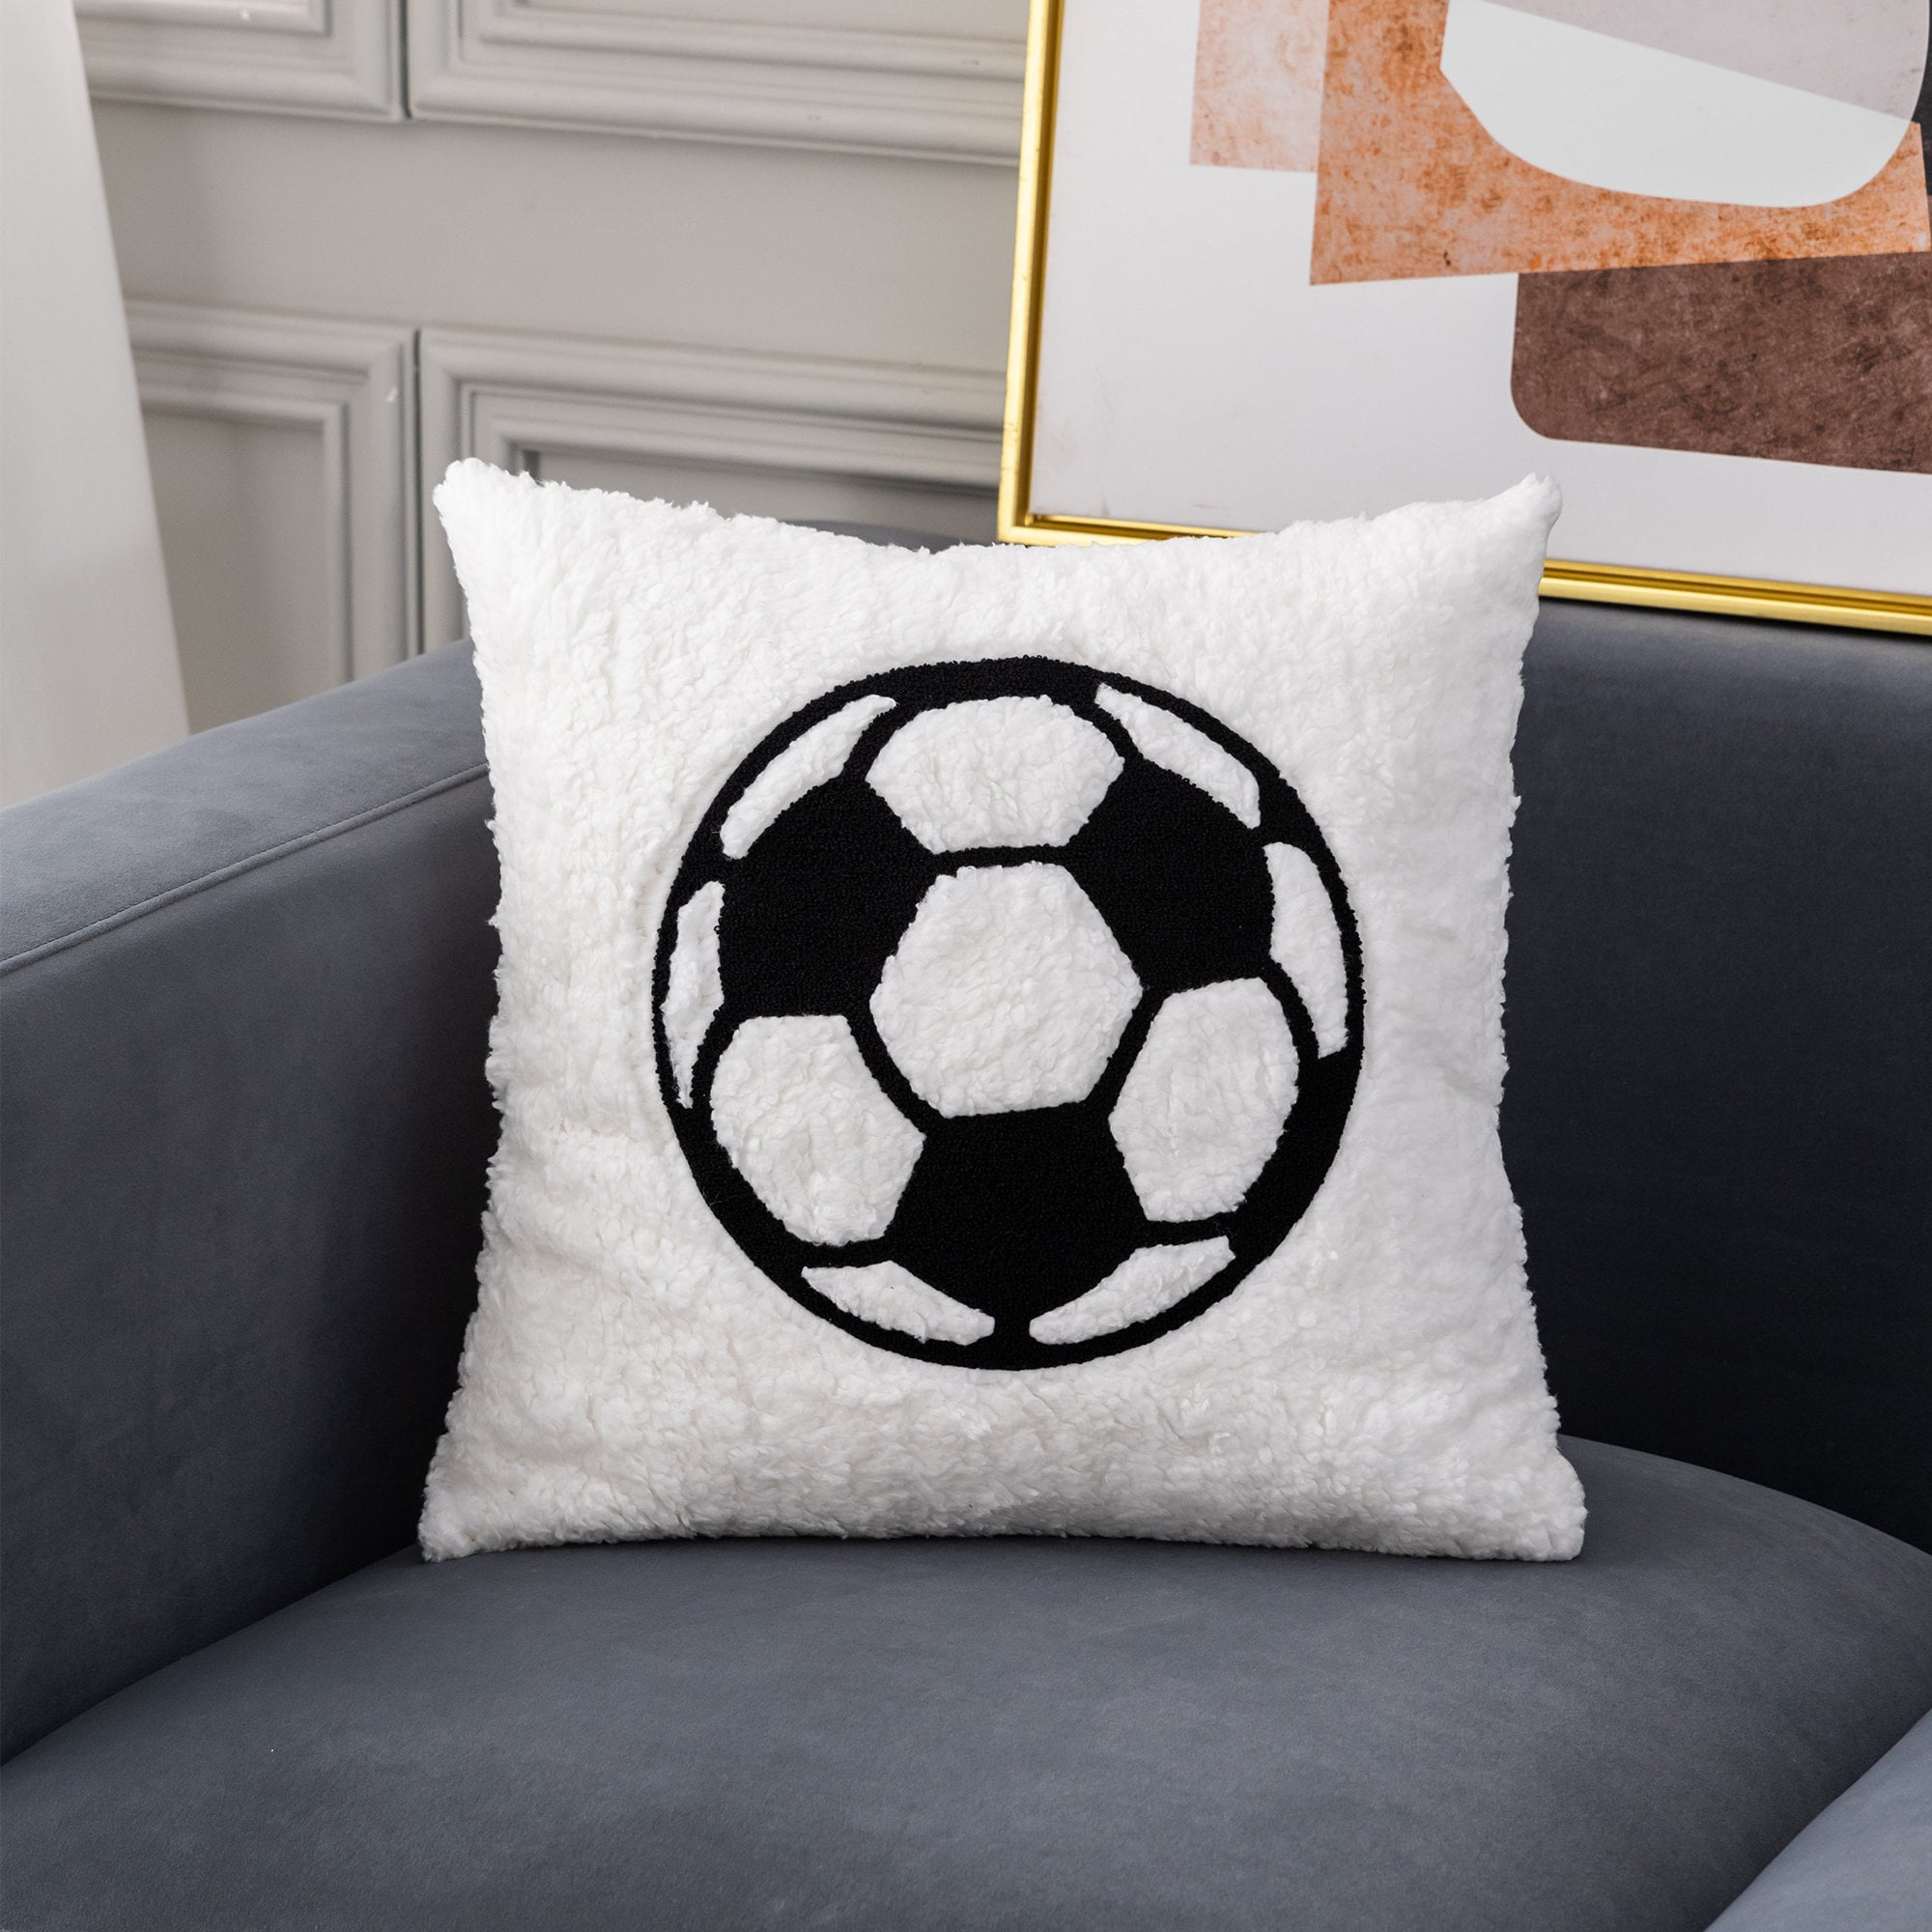 Soft Throw Pillow Covers for Soccer Fans